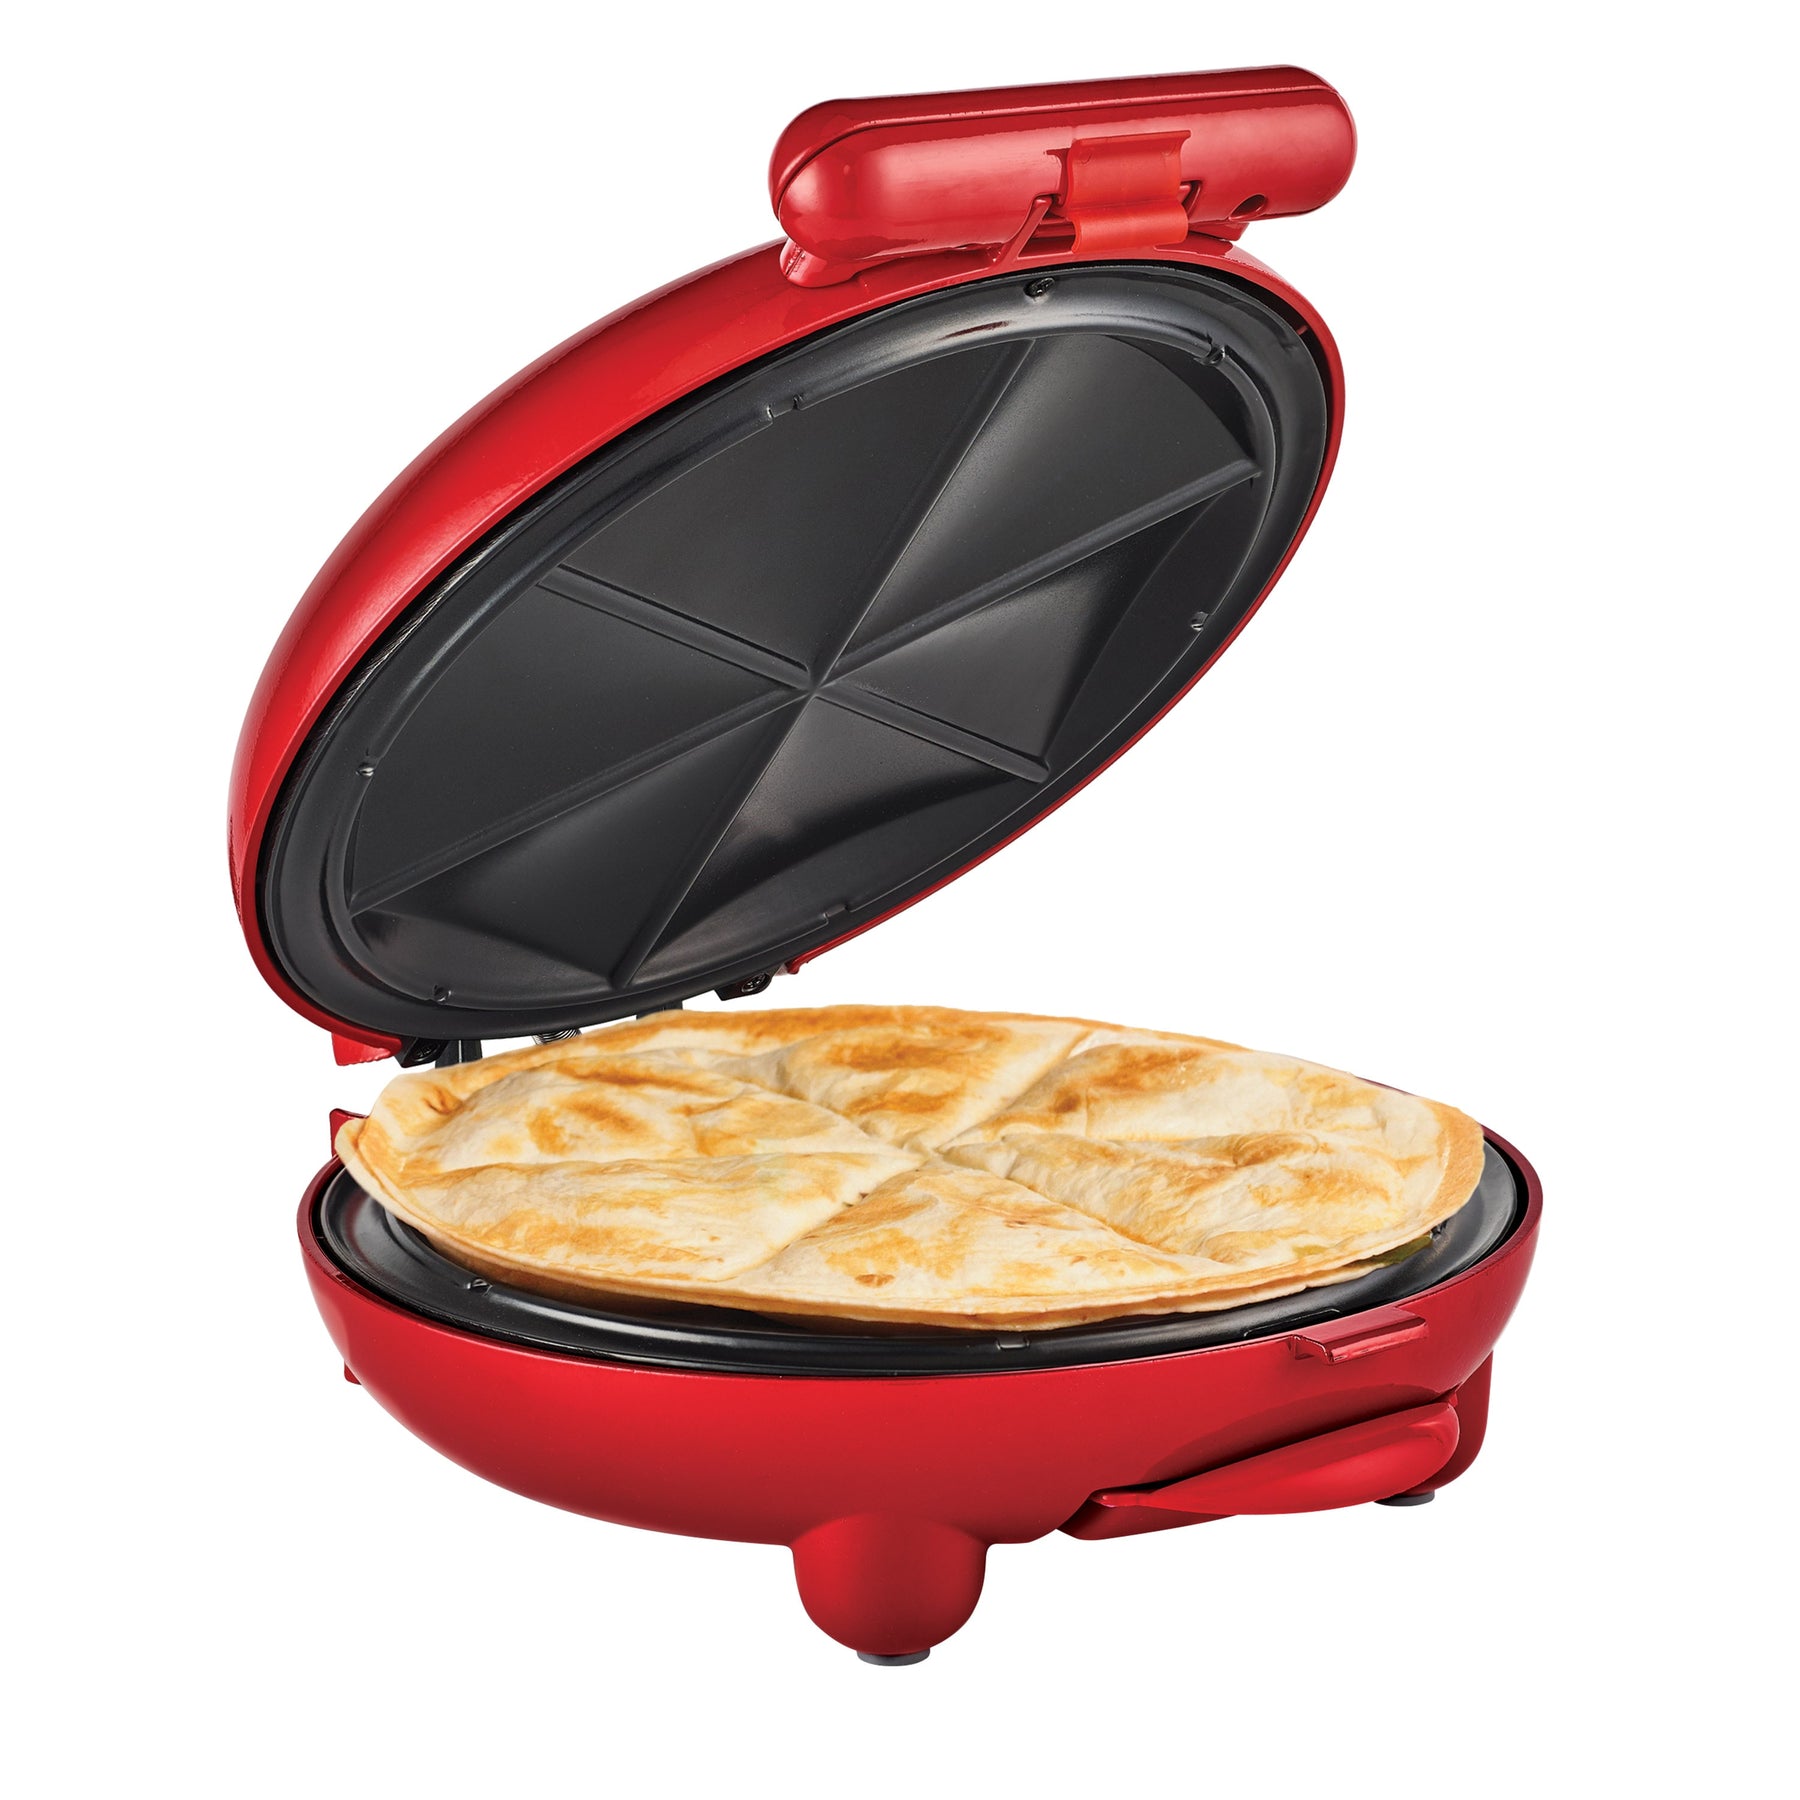 Everything you should know about the quesadilla maker